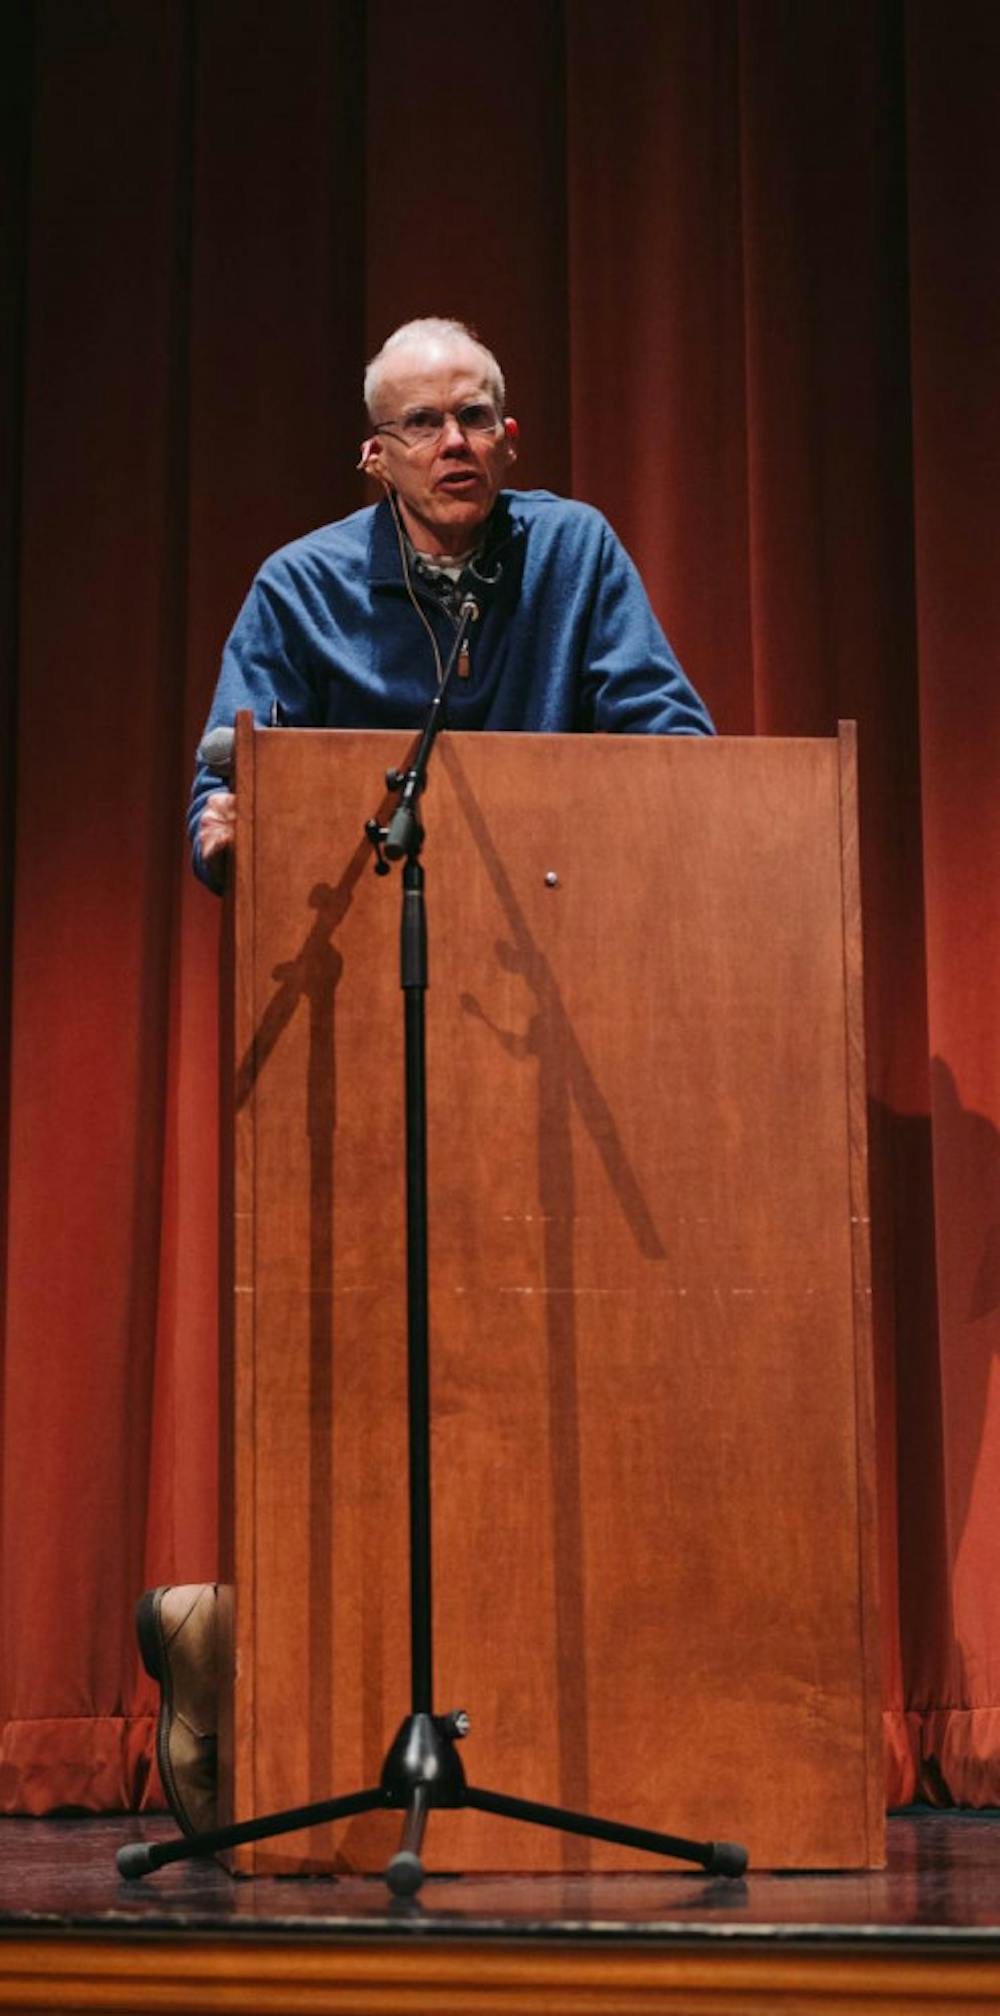 <span class="photocreditinline"><a href="https://middleburycampus.com/staff_profile/shirley-mao/">SHIRLEY MAO</a></span><br />Bill McKibben, scholar-in-residence at Middlebury, introduced his longtime friend Naomi Klein at the Scott A. Margolin ’99 lecture last Thursday. He was arrested last month in Washington D.C. while protesting Chase Bank’s relationship with fossil fuels.